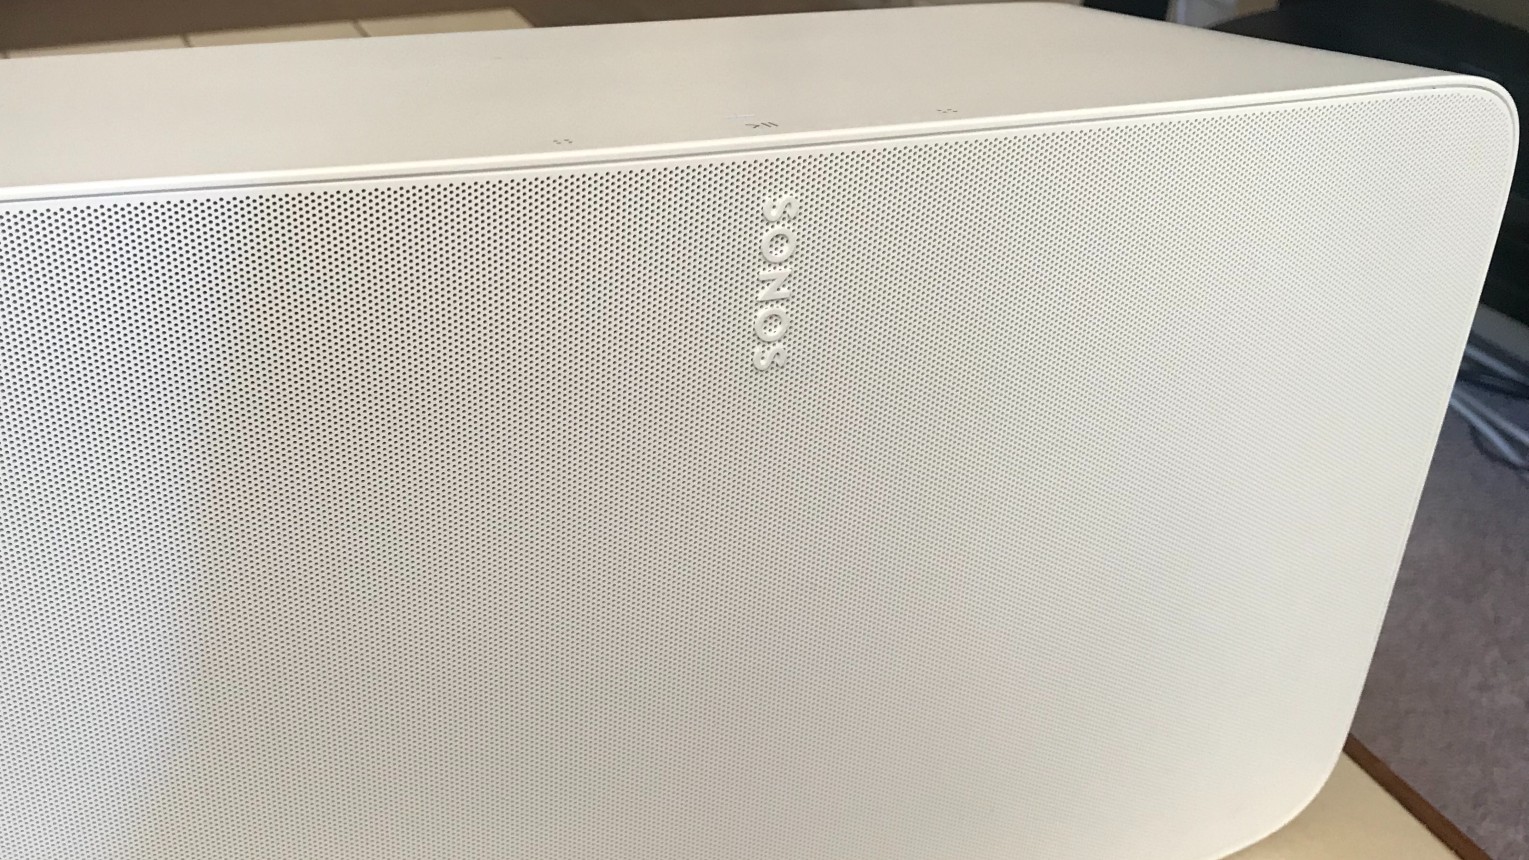 Sonos Five on a table